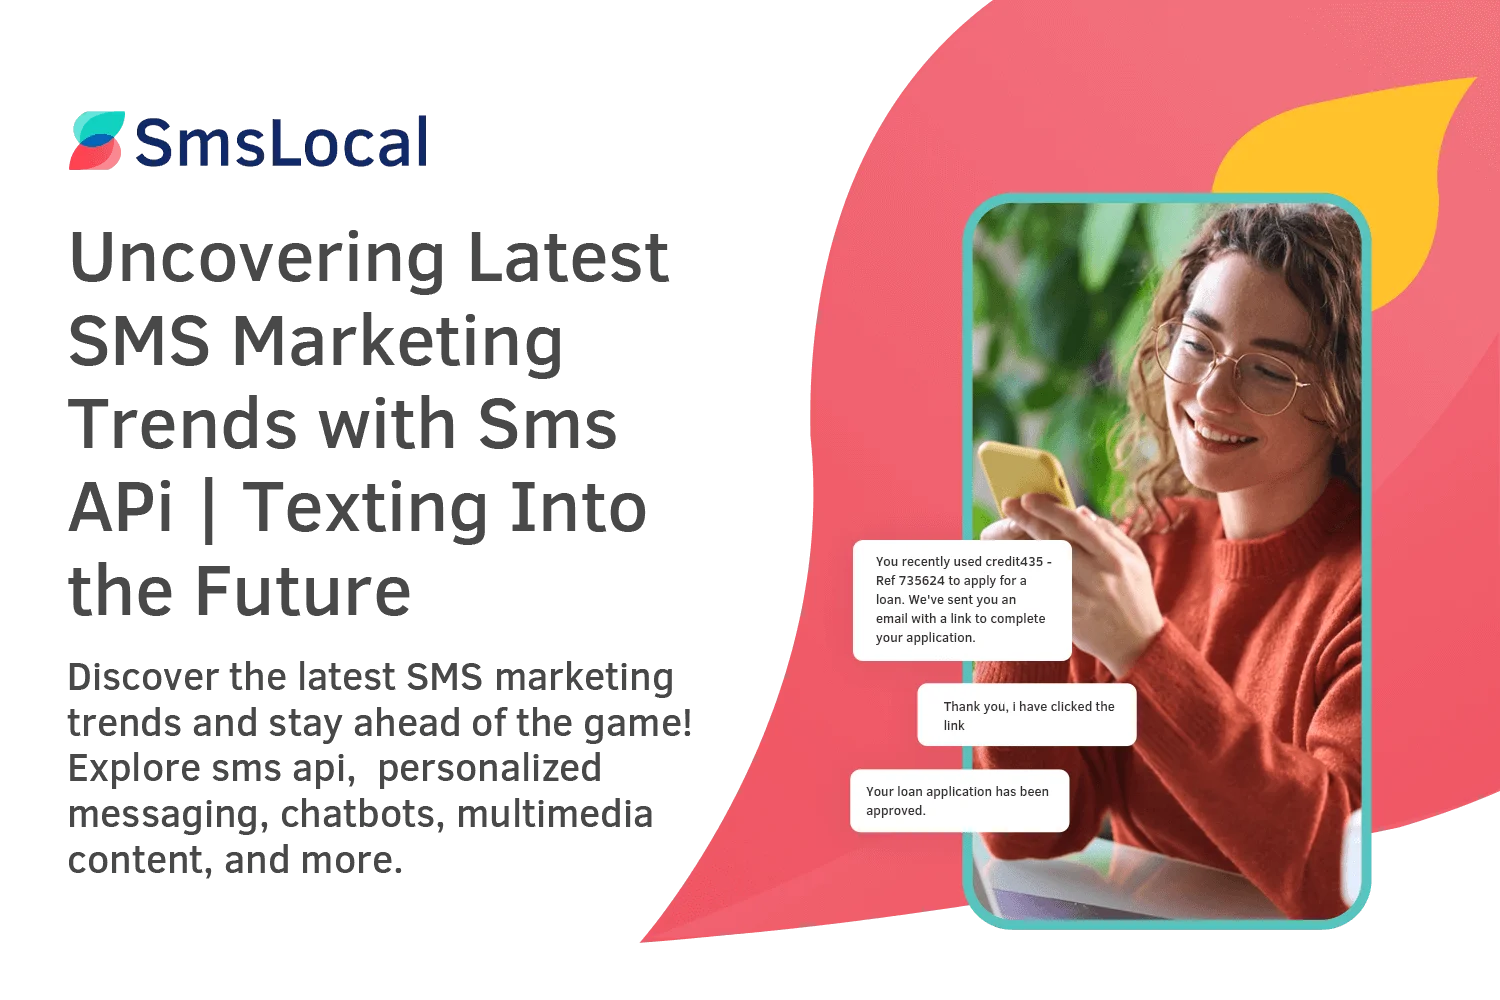 Uncovering-Latest-SMS-Marketing-Trends-with-Sms-APi--Texting-Into-the-Future (1)